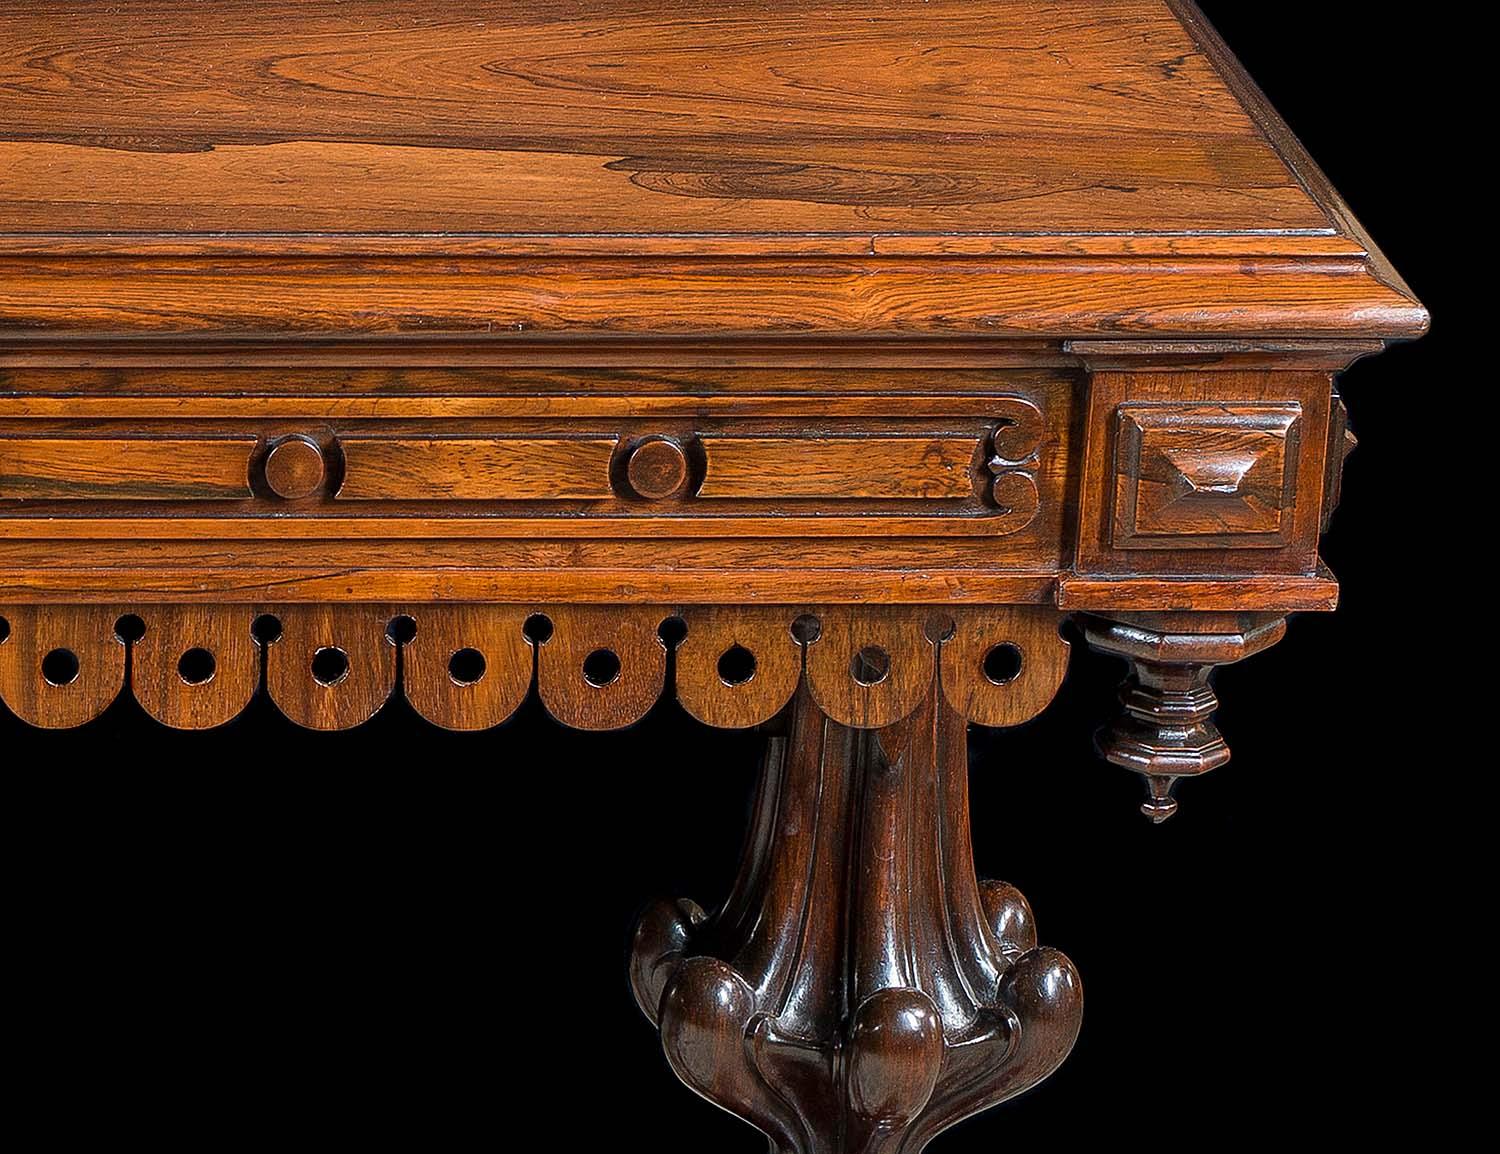 A fine early Victorian, rosewood library table in the manner of the architect and designer Richard Bridgens (1785-1846). The finely figured top, with a moulded edge above a framed carved baton and disc frieze and square paterae on each corner, is